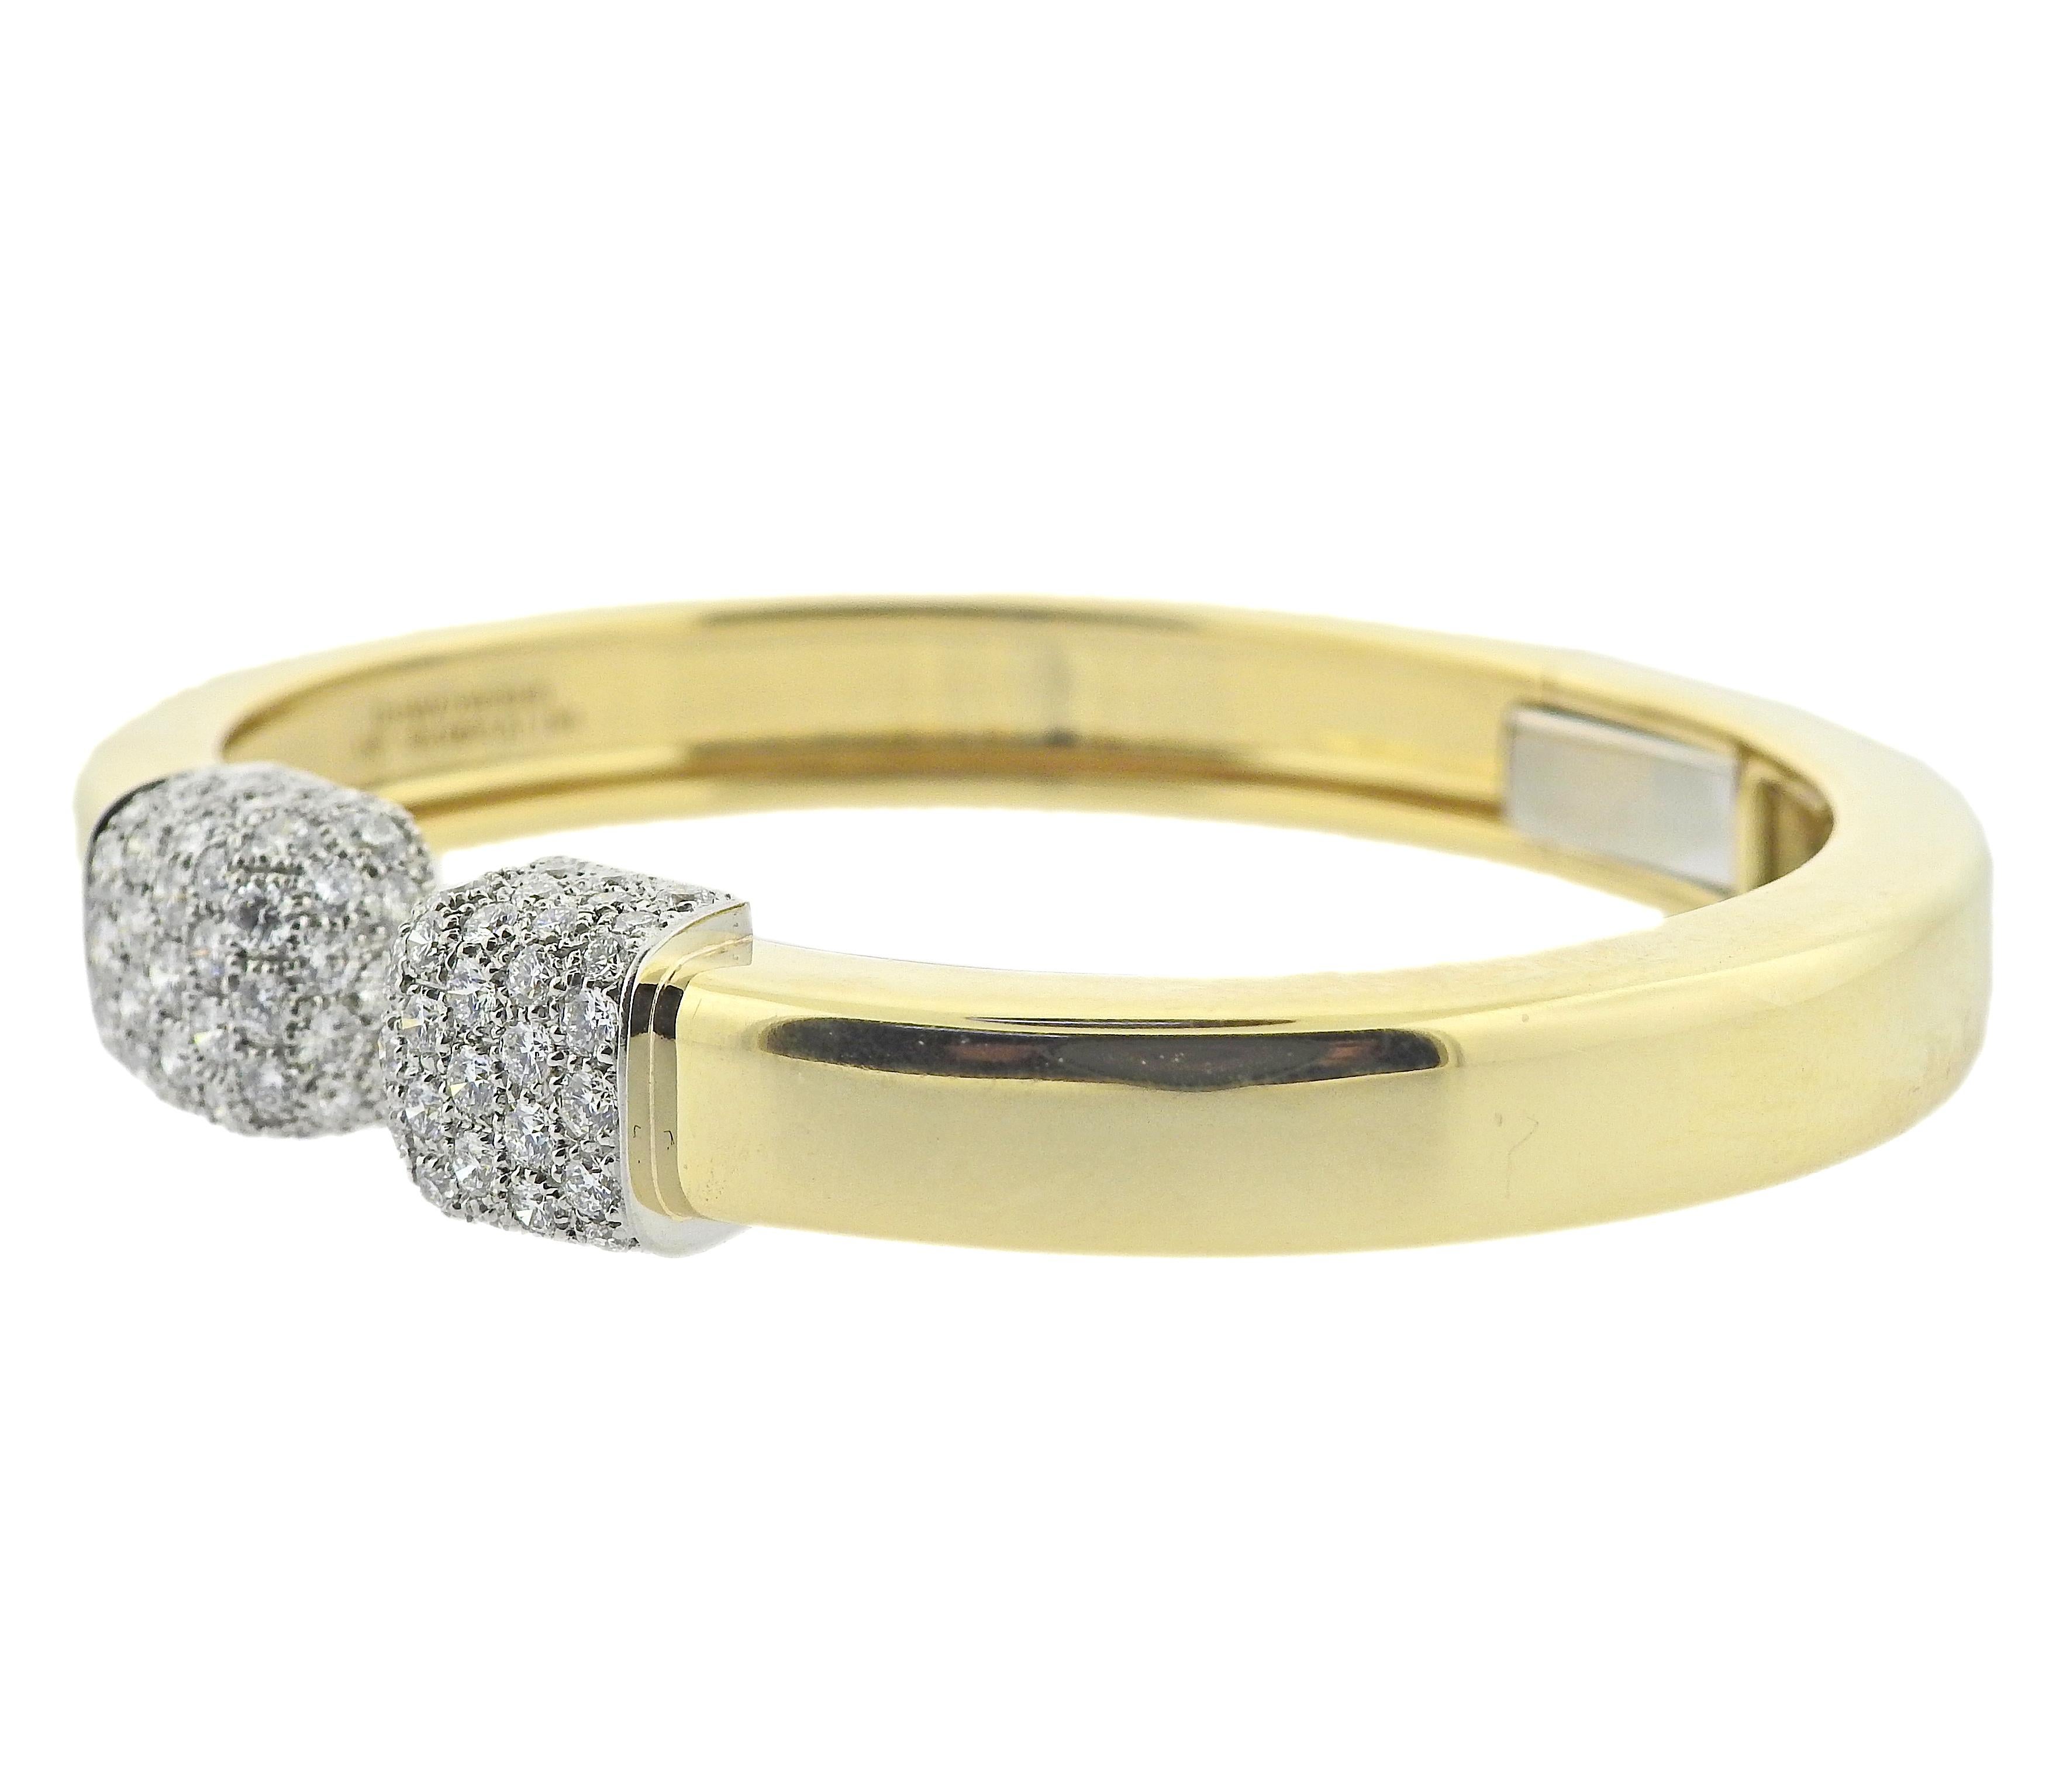 David Webb 18k gold and platinum Sugar Cube bracelet with approx. 1.60ctw VS-SI/H diamonds. Bracelet will fit approx. 6.5-7